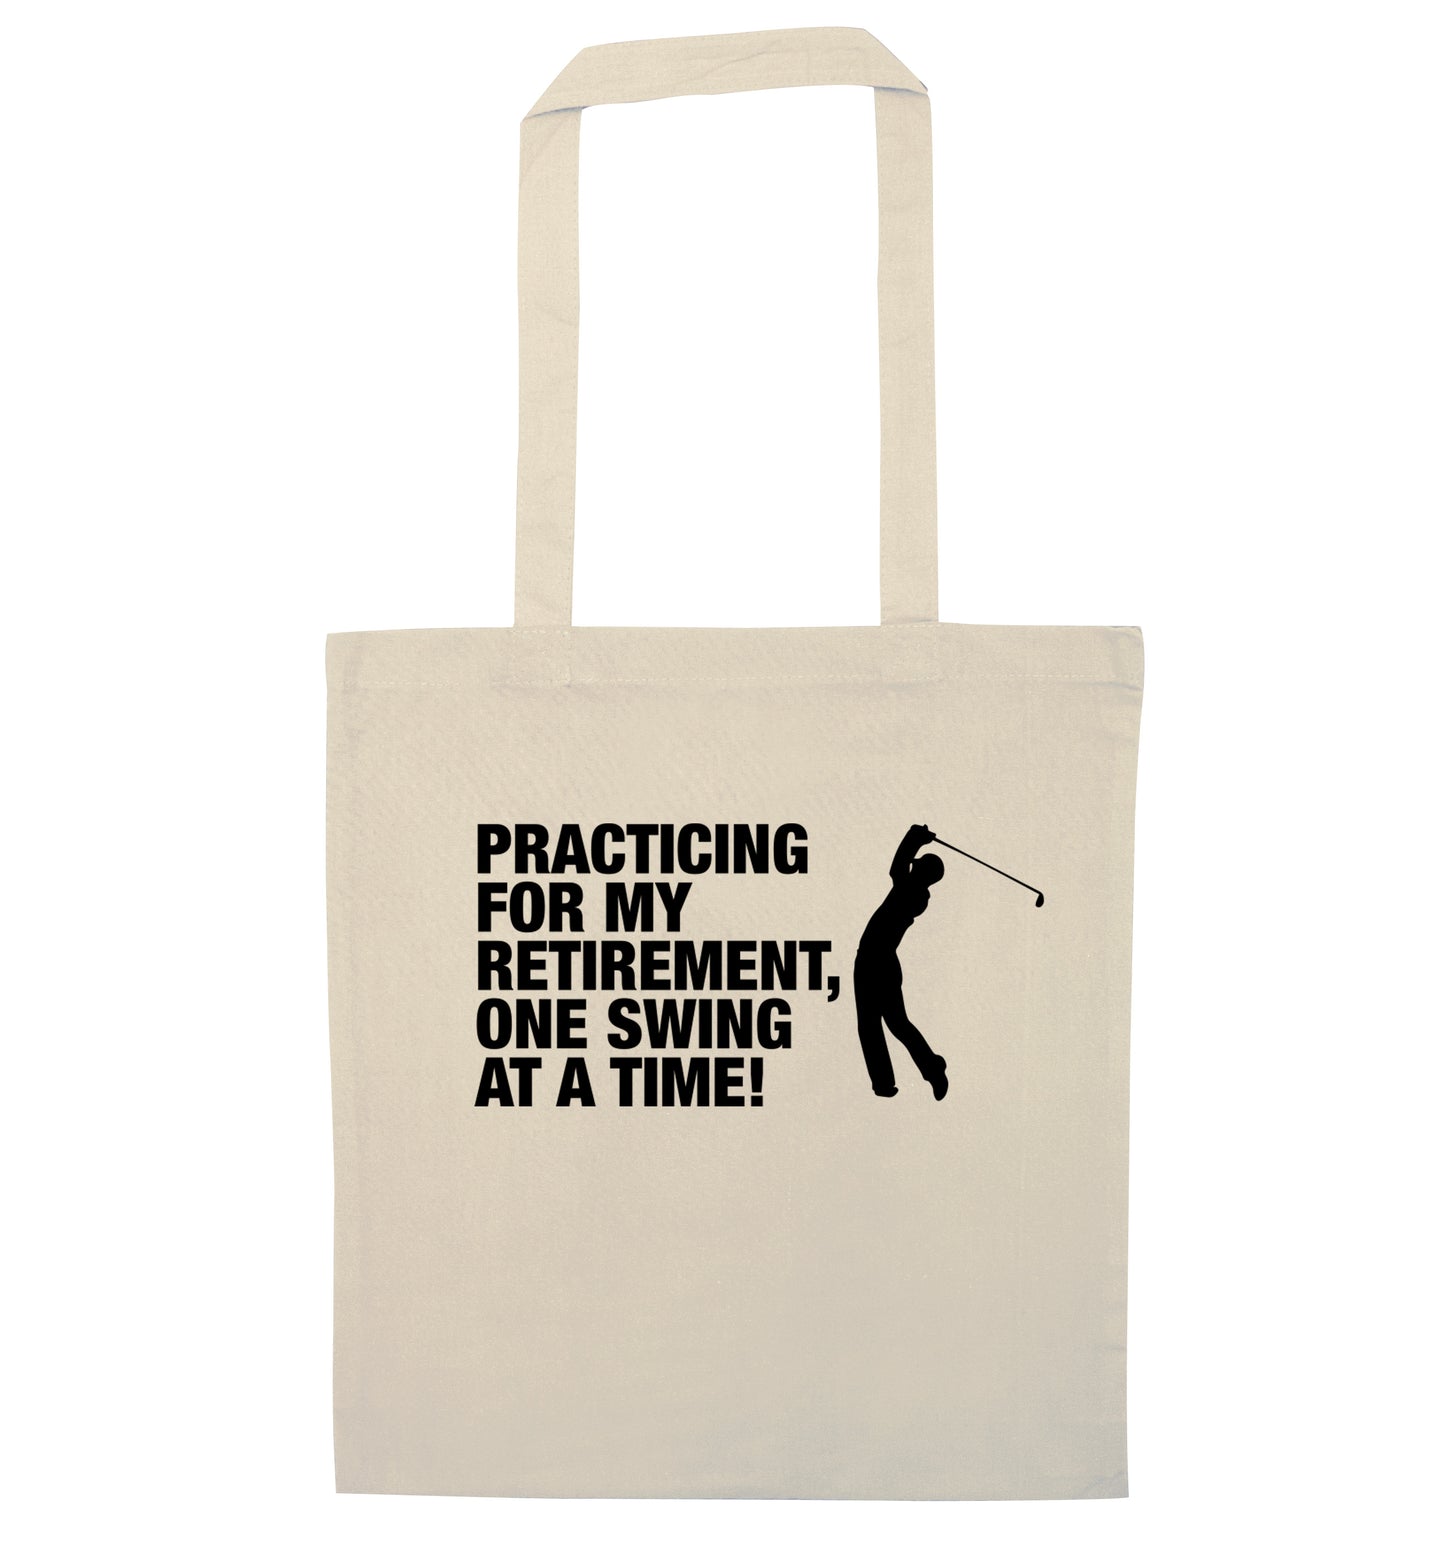 Practicing for my retirement one swing at a time natural tote bag